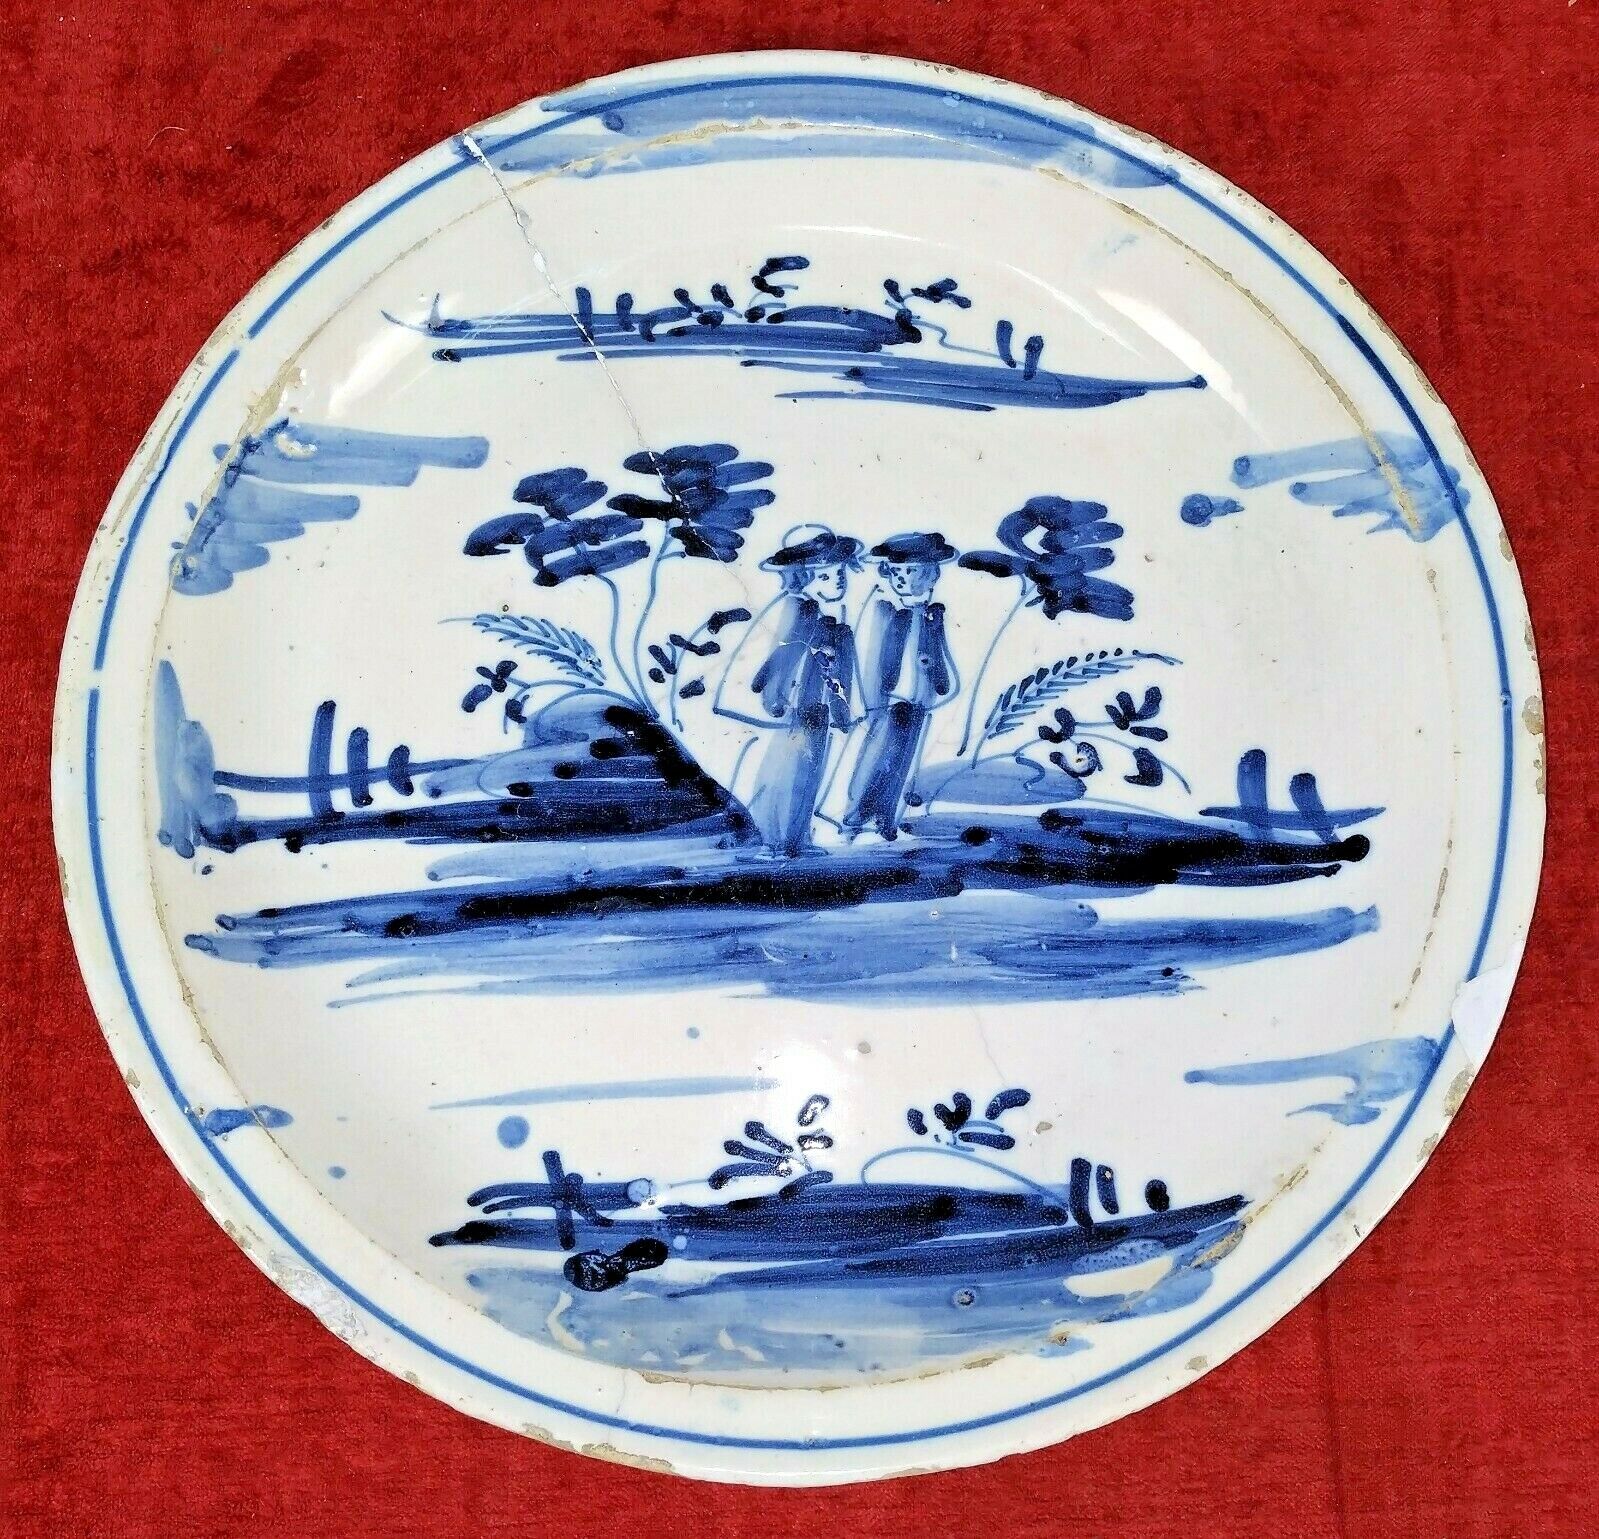 OLD CATALAN CERAMIC PLATE. GLAZED IN BLUE AND WHITE. SPAIN. XVIII CENTURY